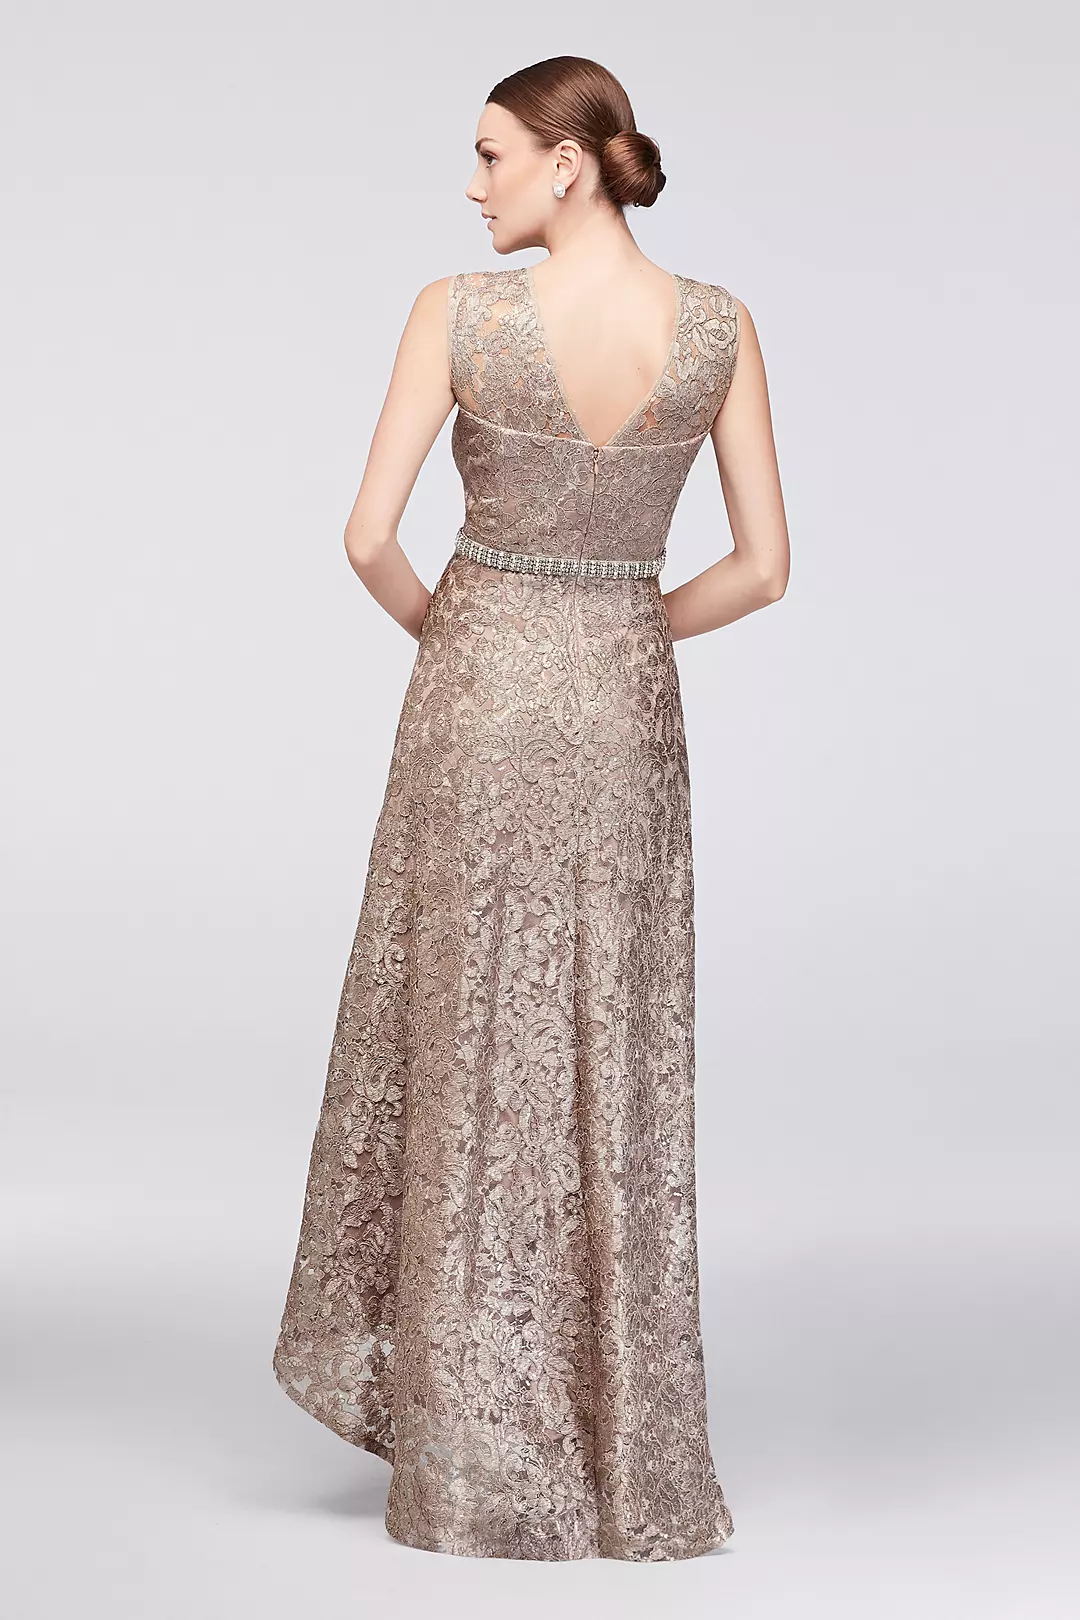 Sequined Lace High-Low Dress with Beaded Waist Image 2